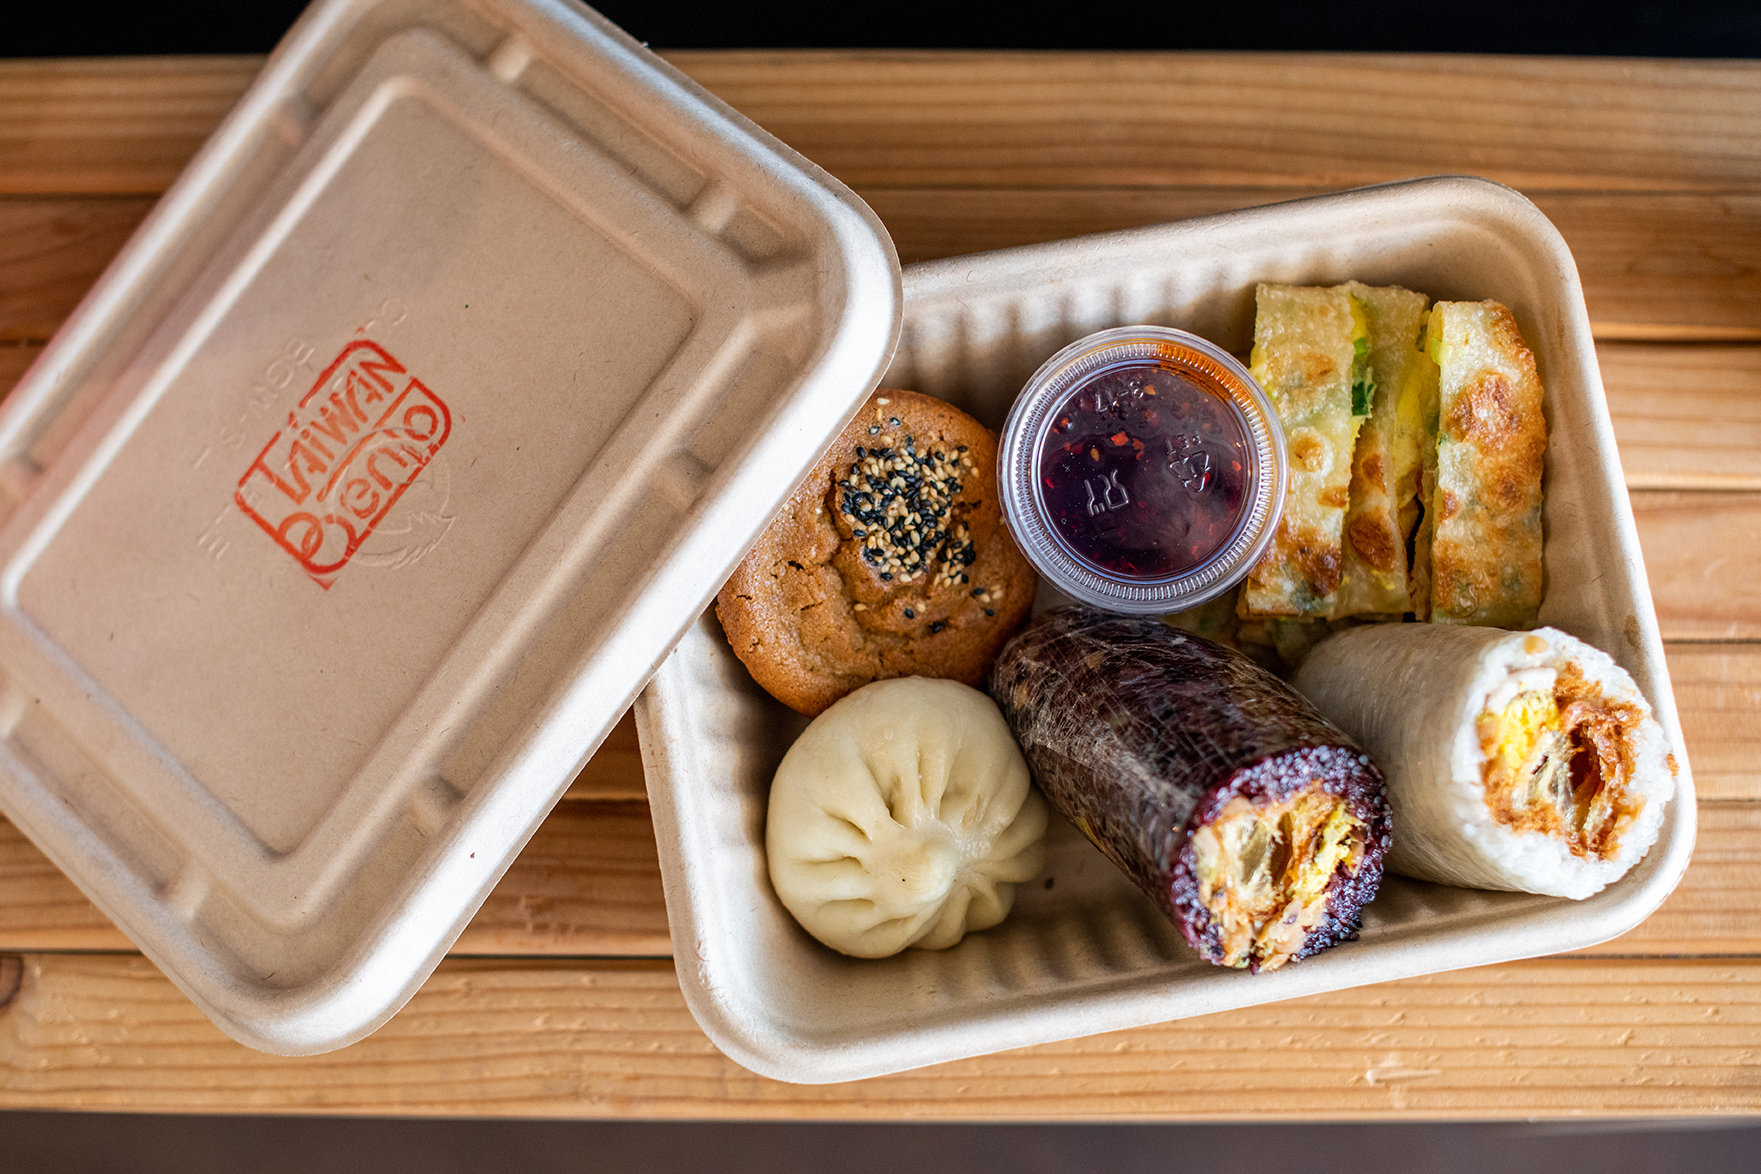 Overhead view of a takeout box with sticky rice rolls, scallion egg pancake, and other Taiwanese breakfast items from Taiwan Bento.